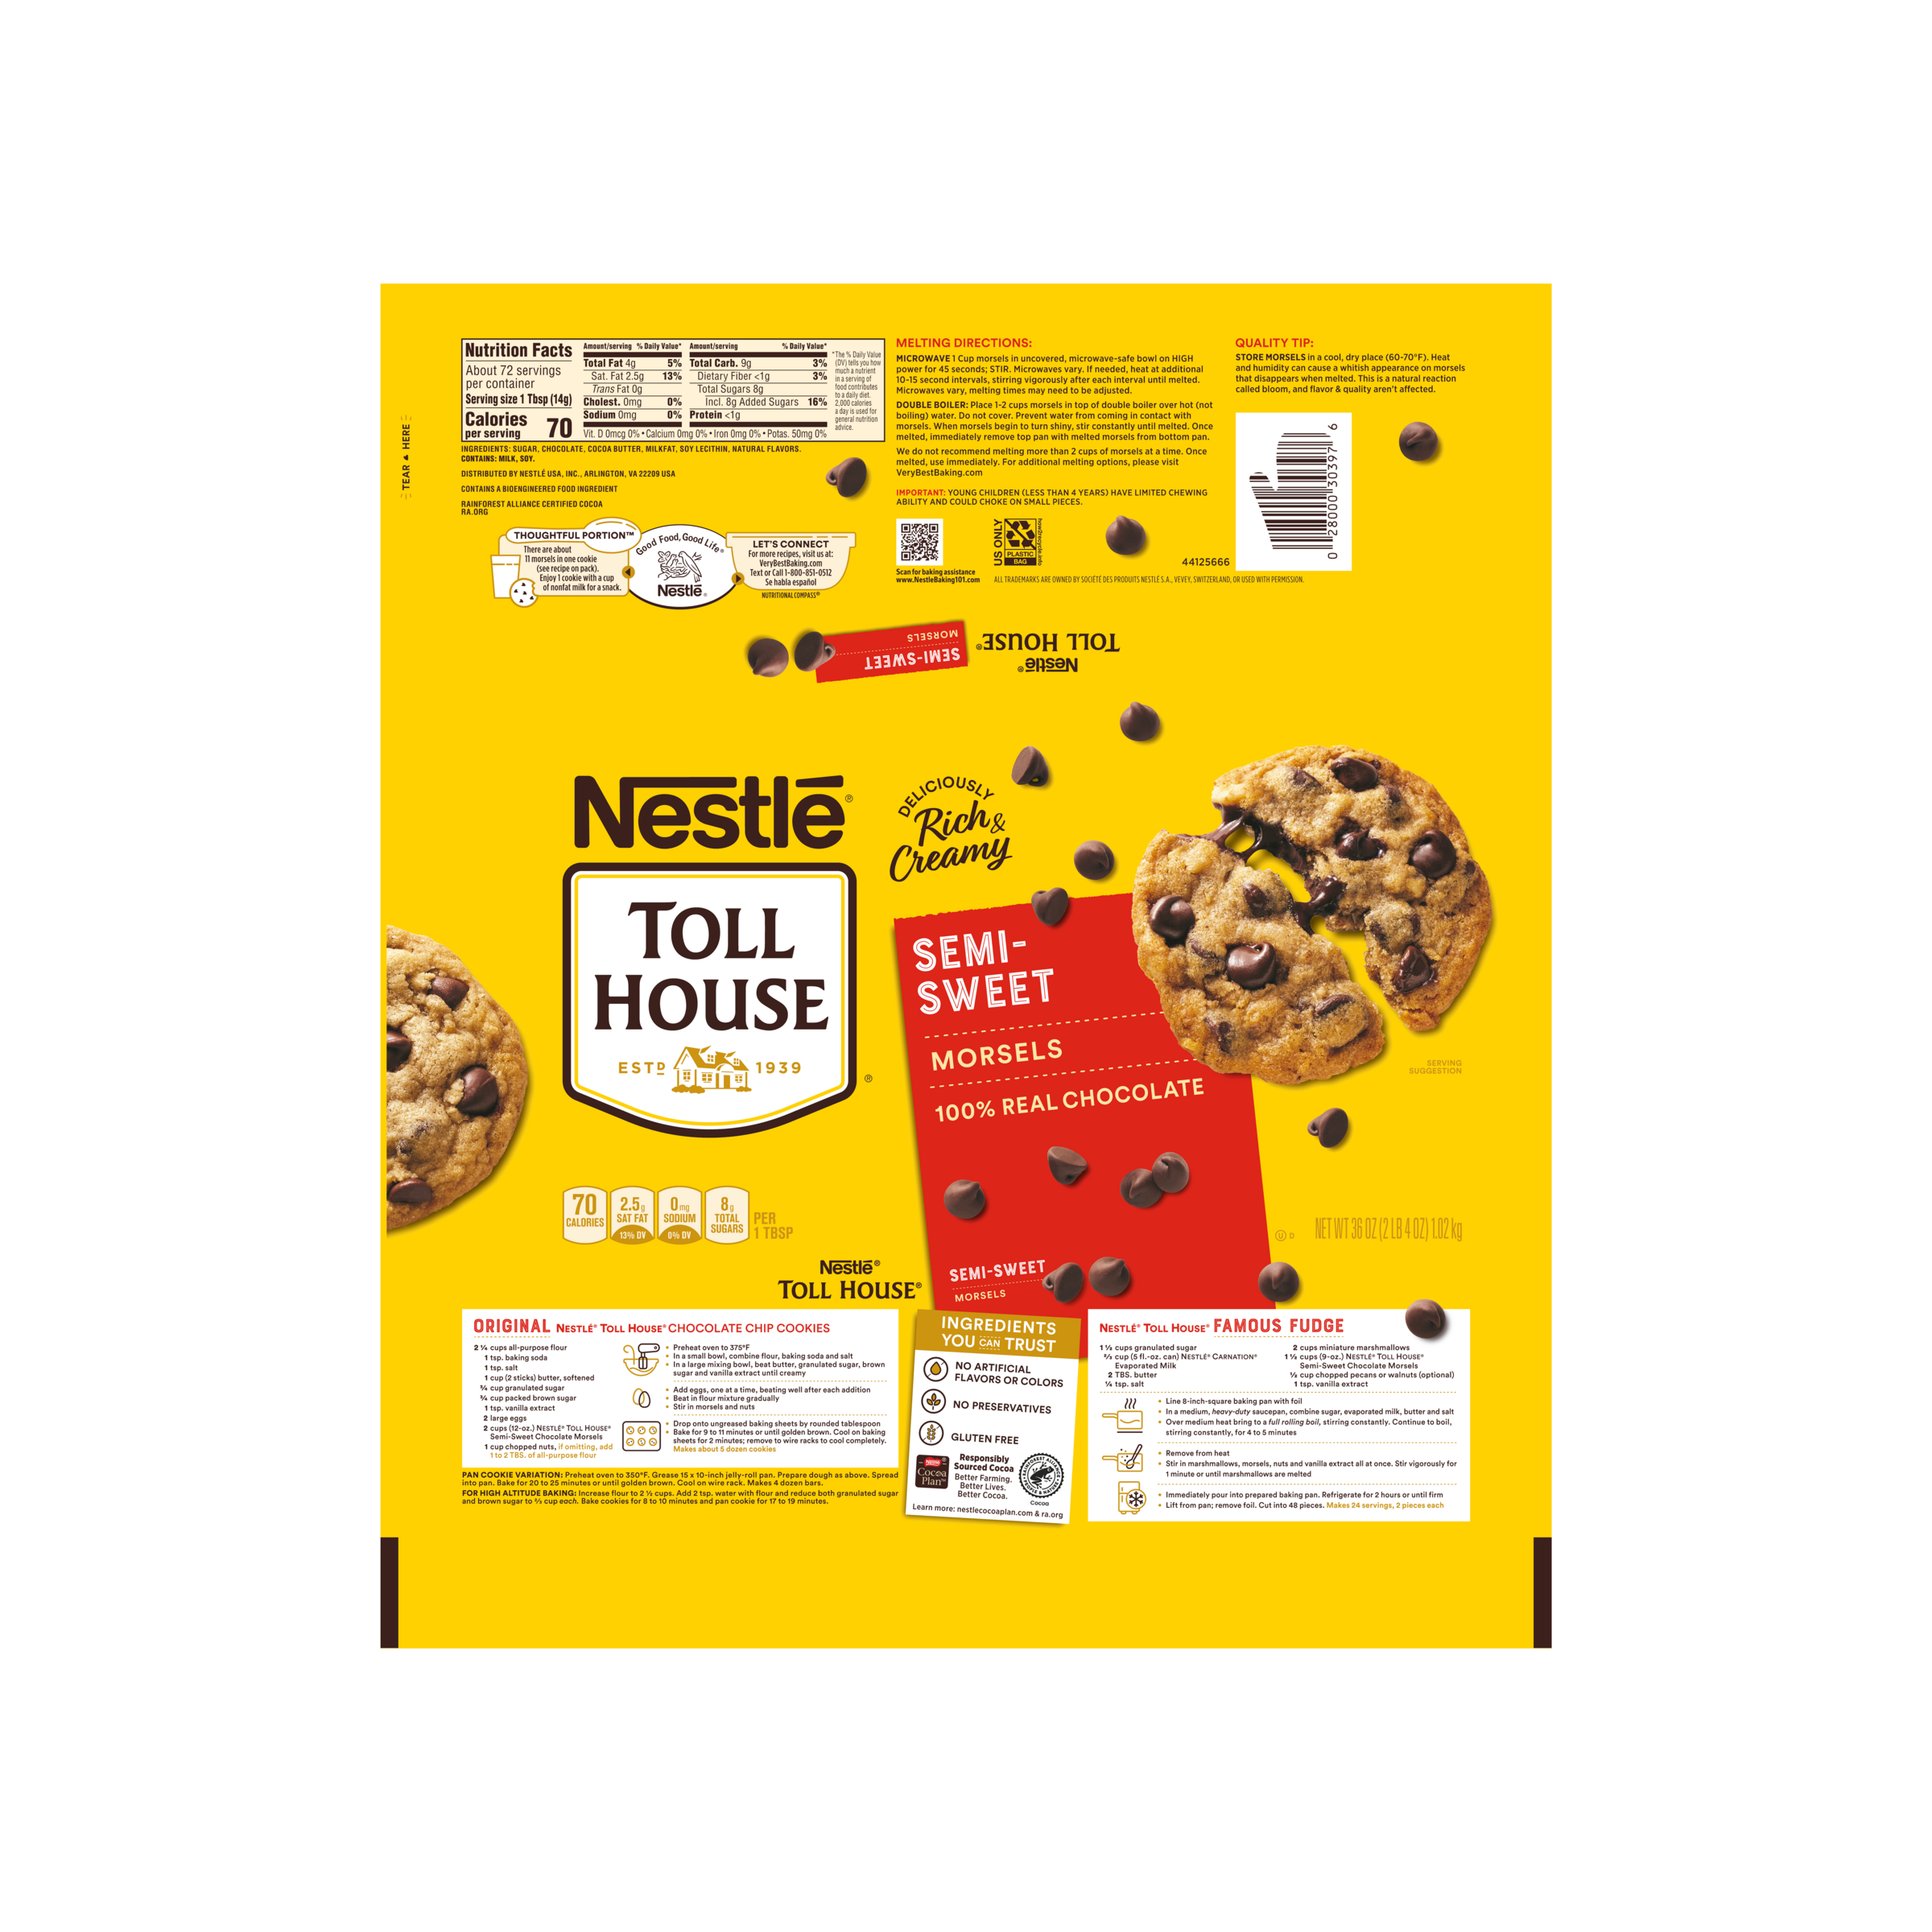 TOLL HOUSE Semi-Sweet Morsels 8 units per case 36.0 oz Product Label